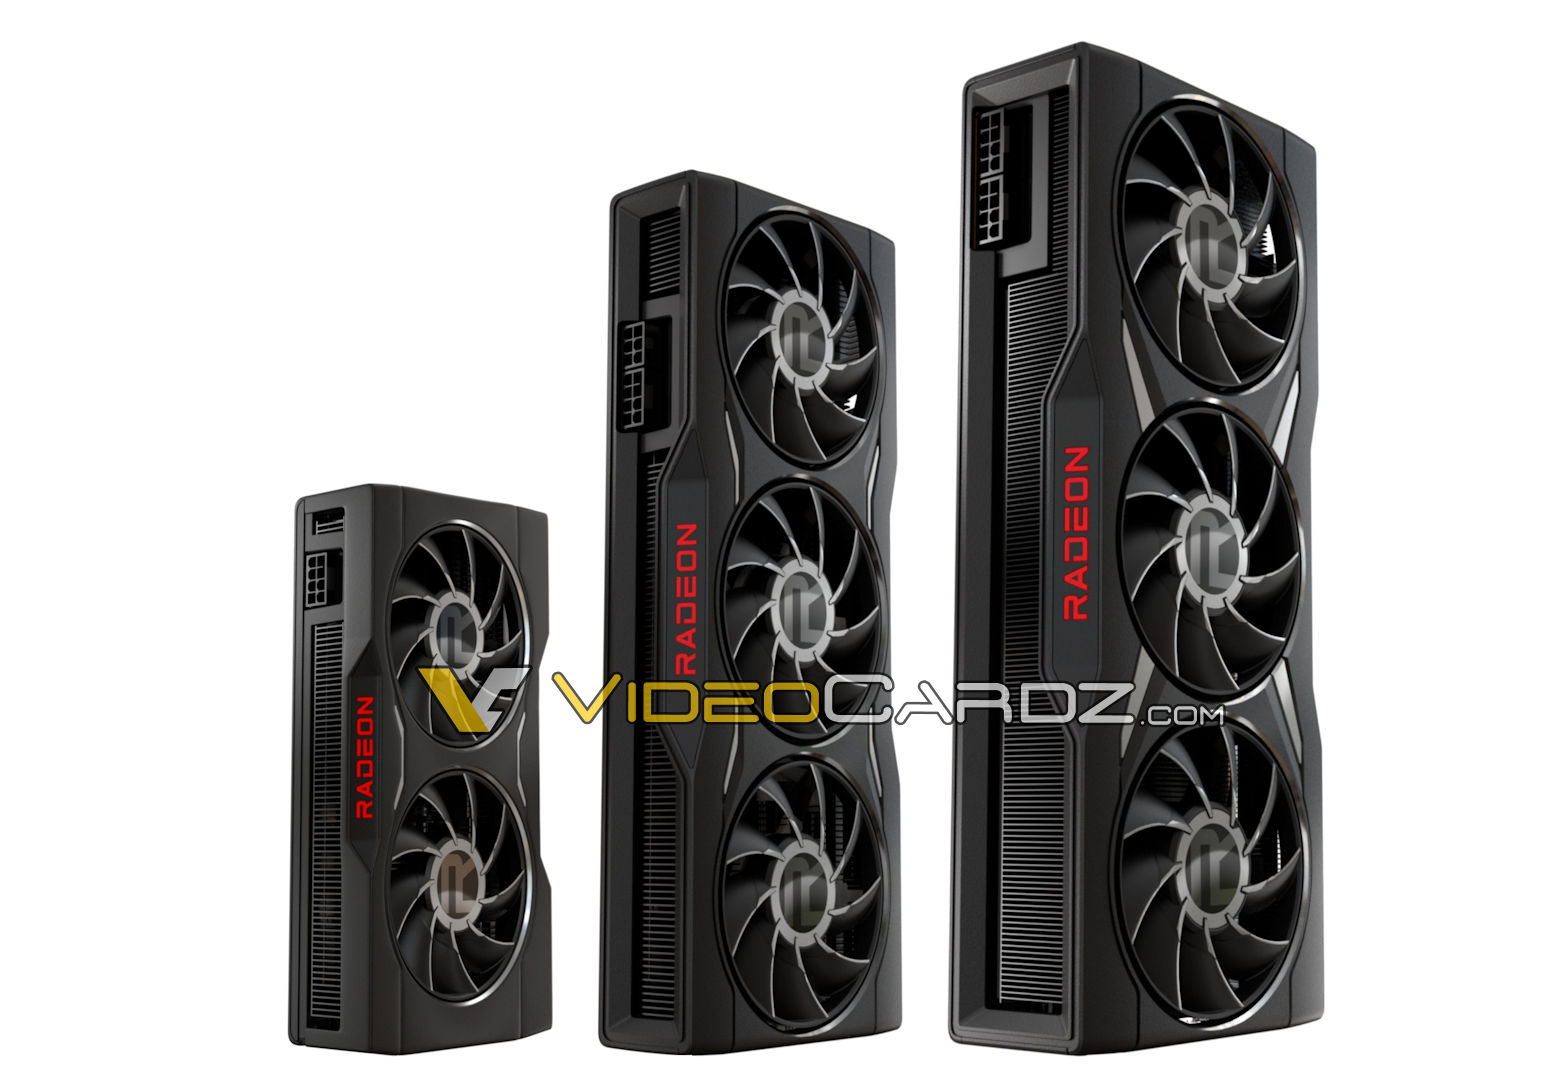 Blive gift nær ved enkelt AMD Radeon RX 6950XT, RX 6750XT and RX 6650XT pictured, release date moved  to May 10th - VideoCardz.com